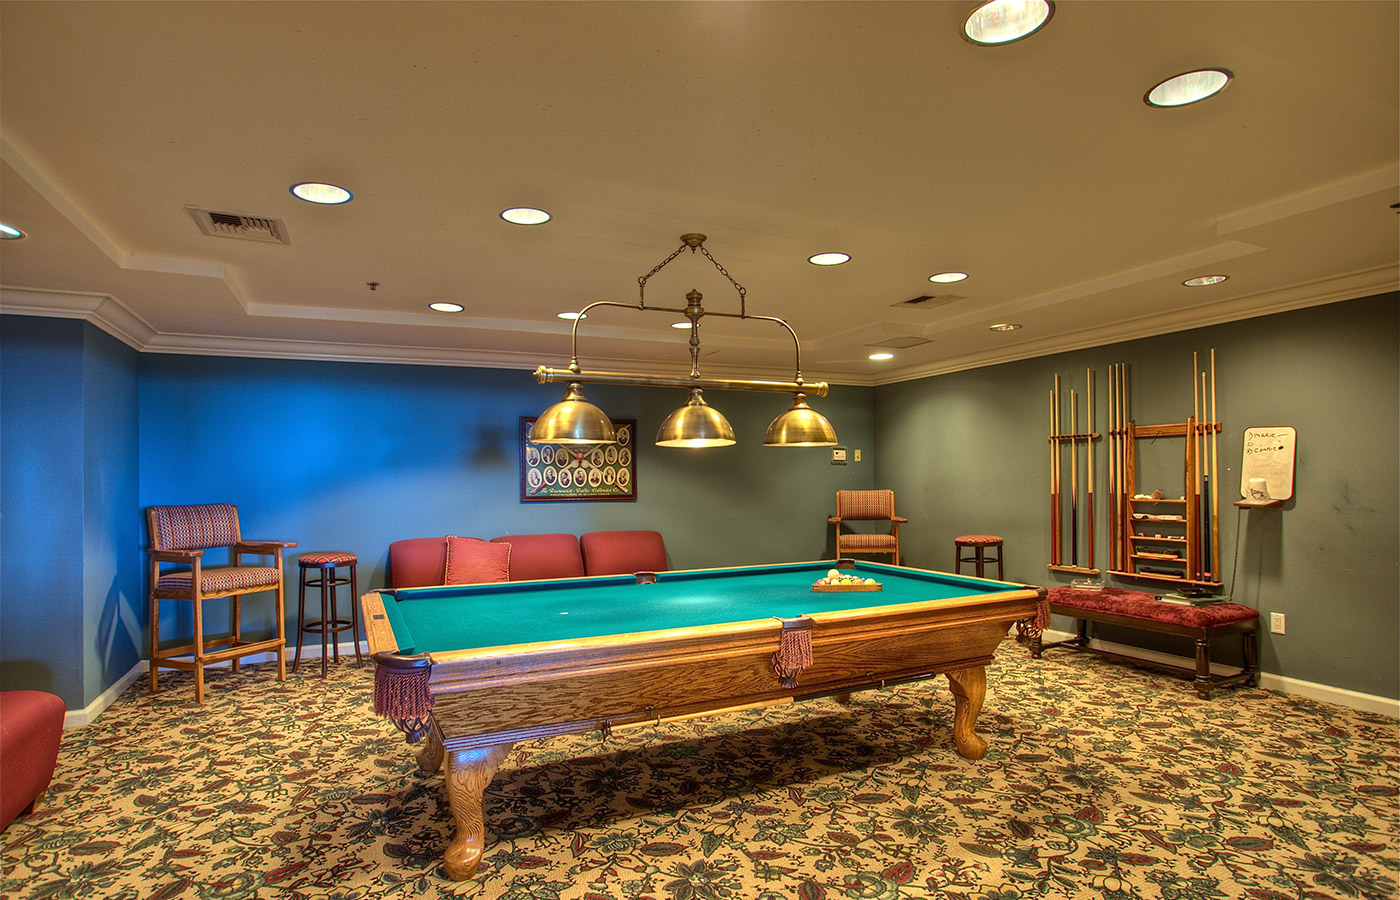 Game room with pool table.